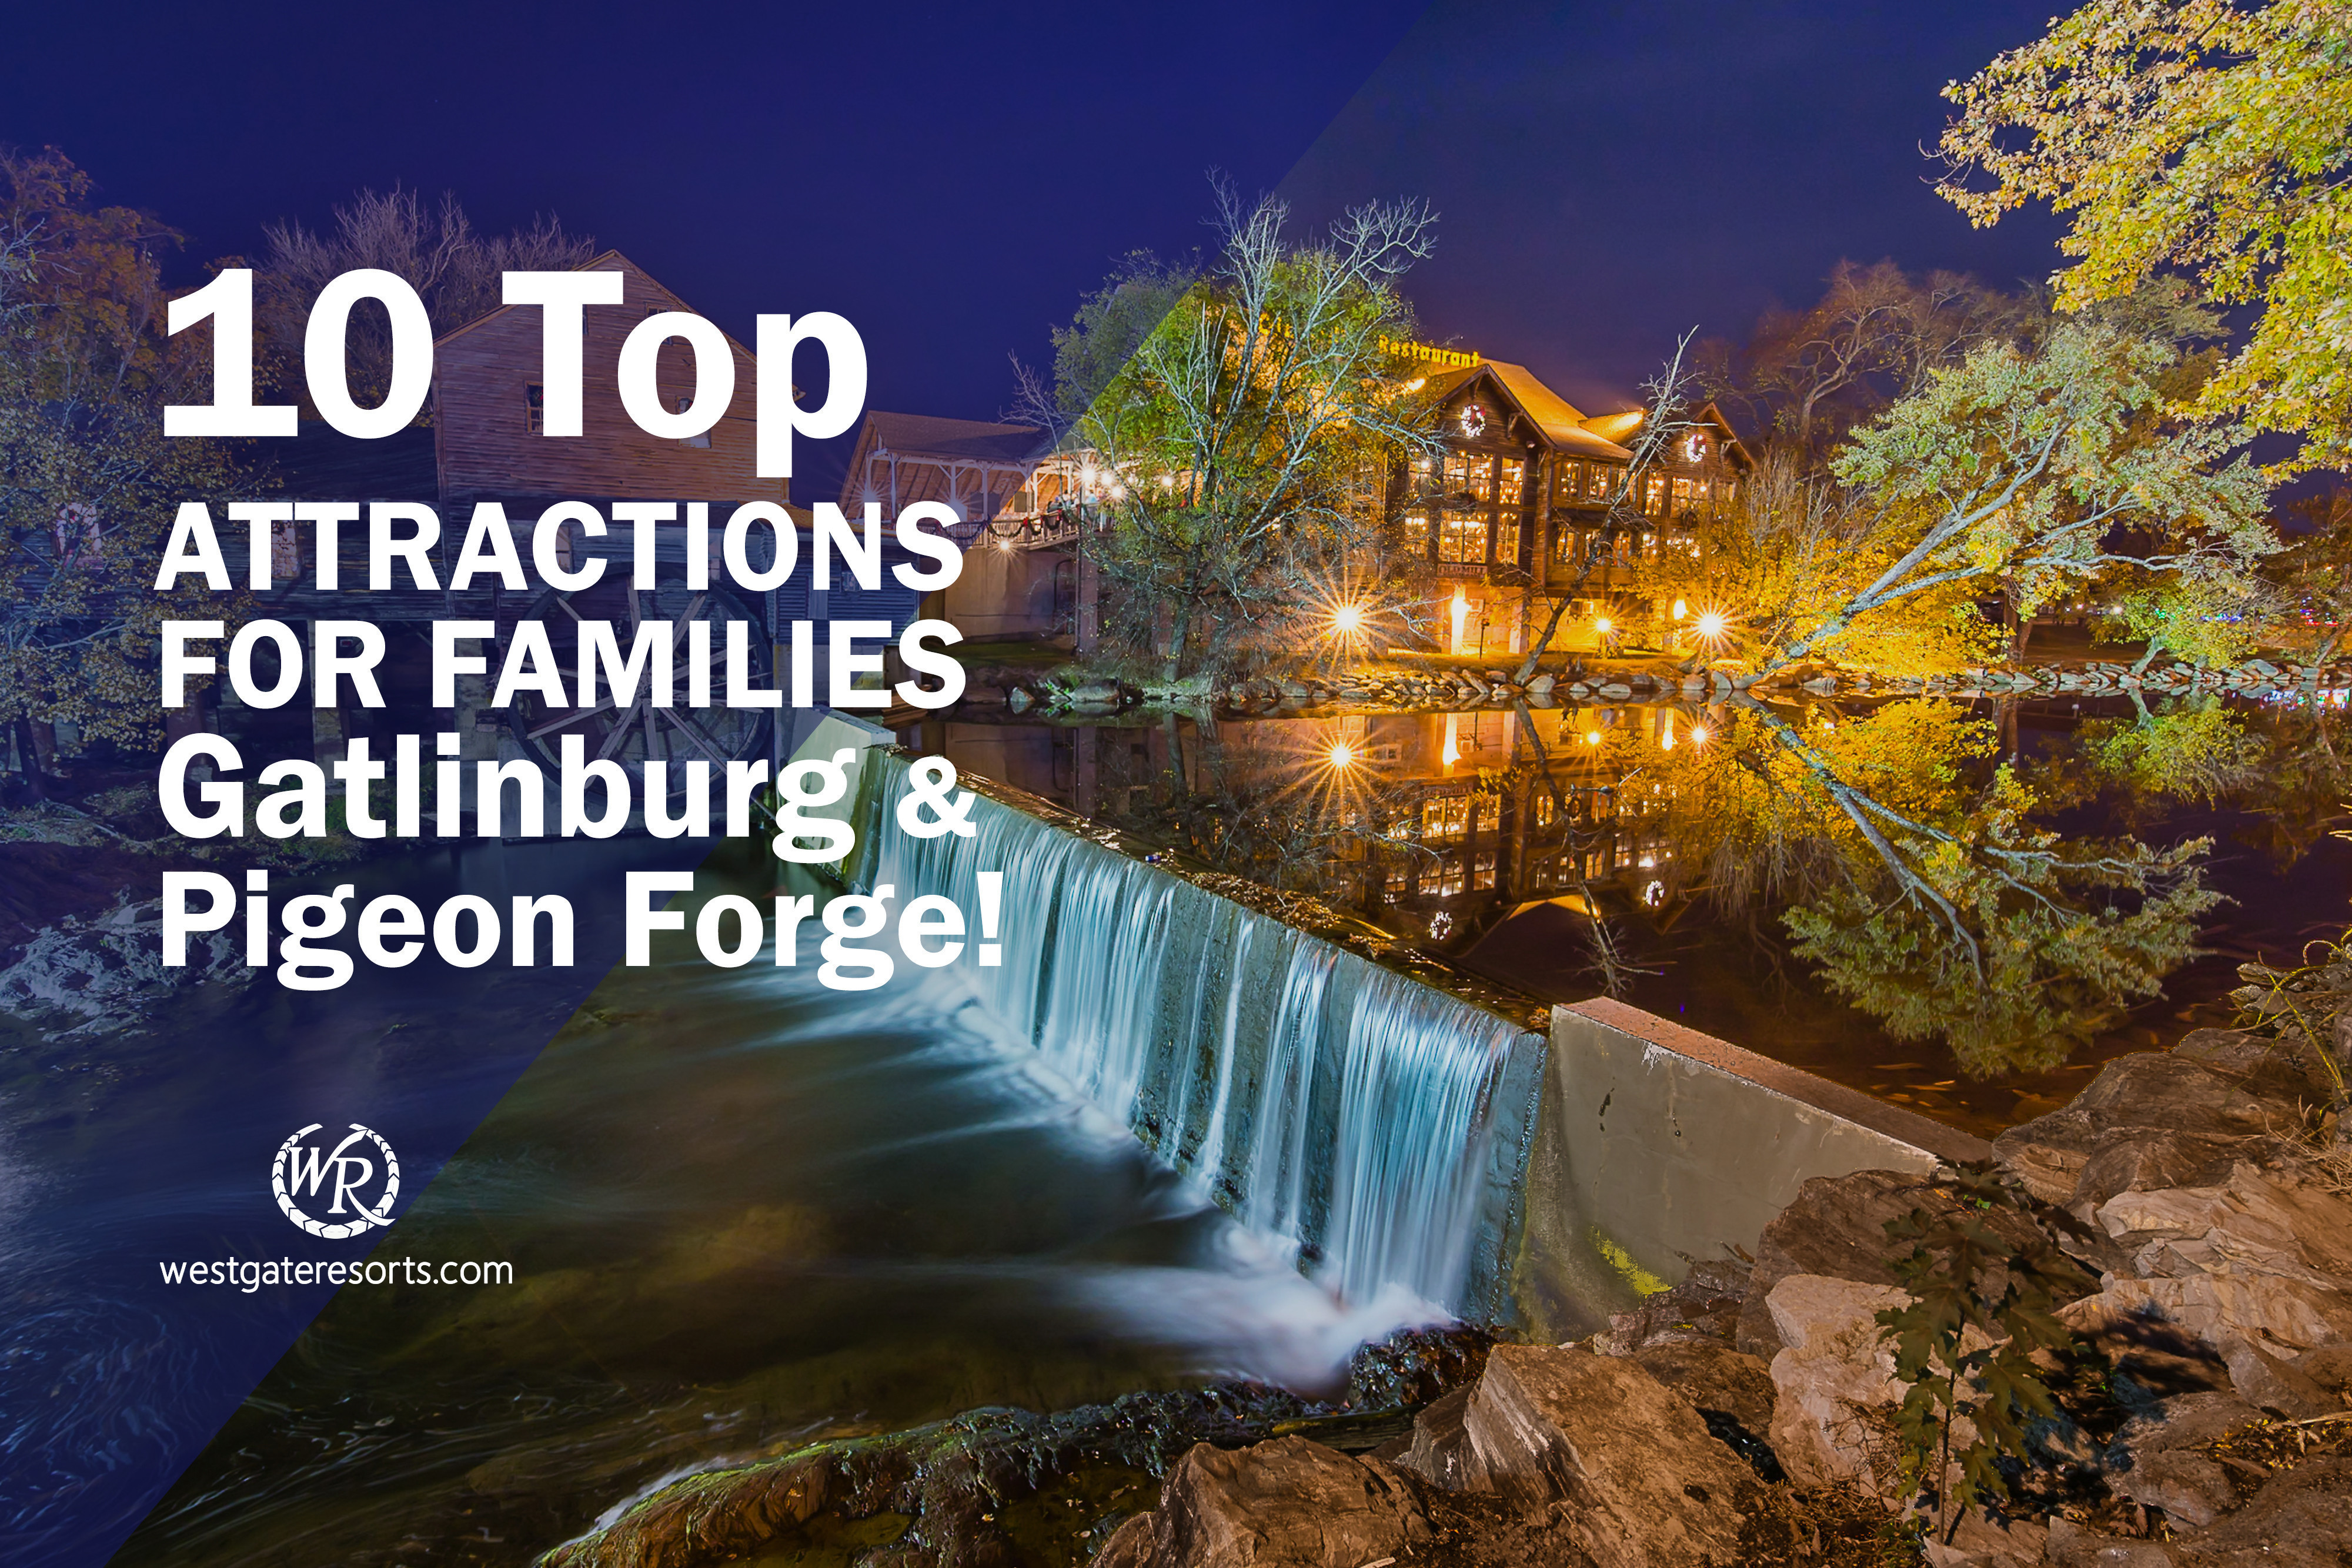 10 Top Attractions For Families in Gatlinburg and Pigeon Forge!